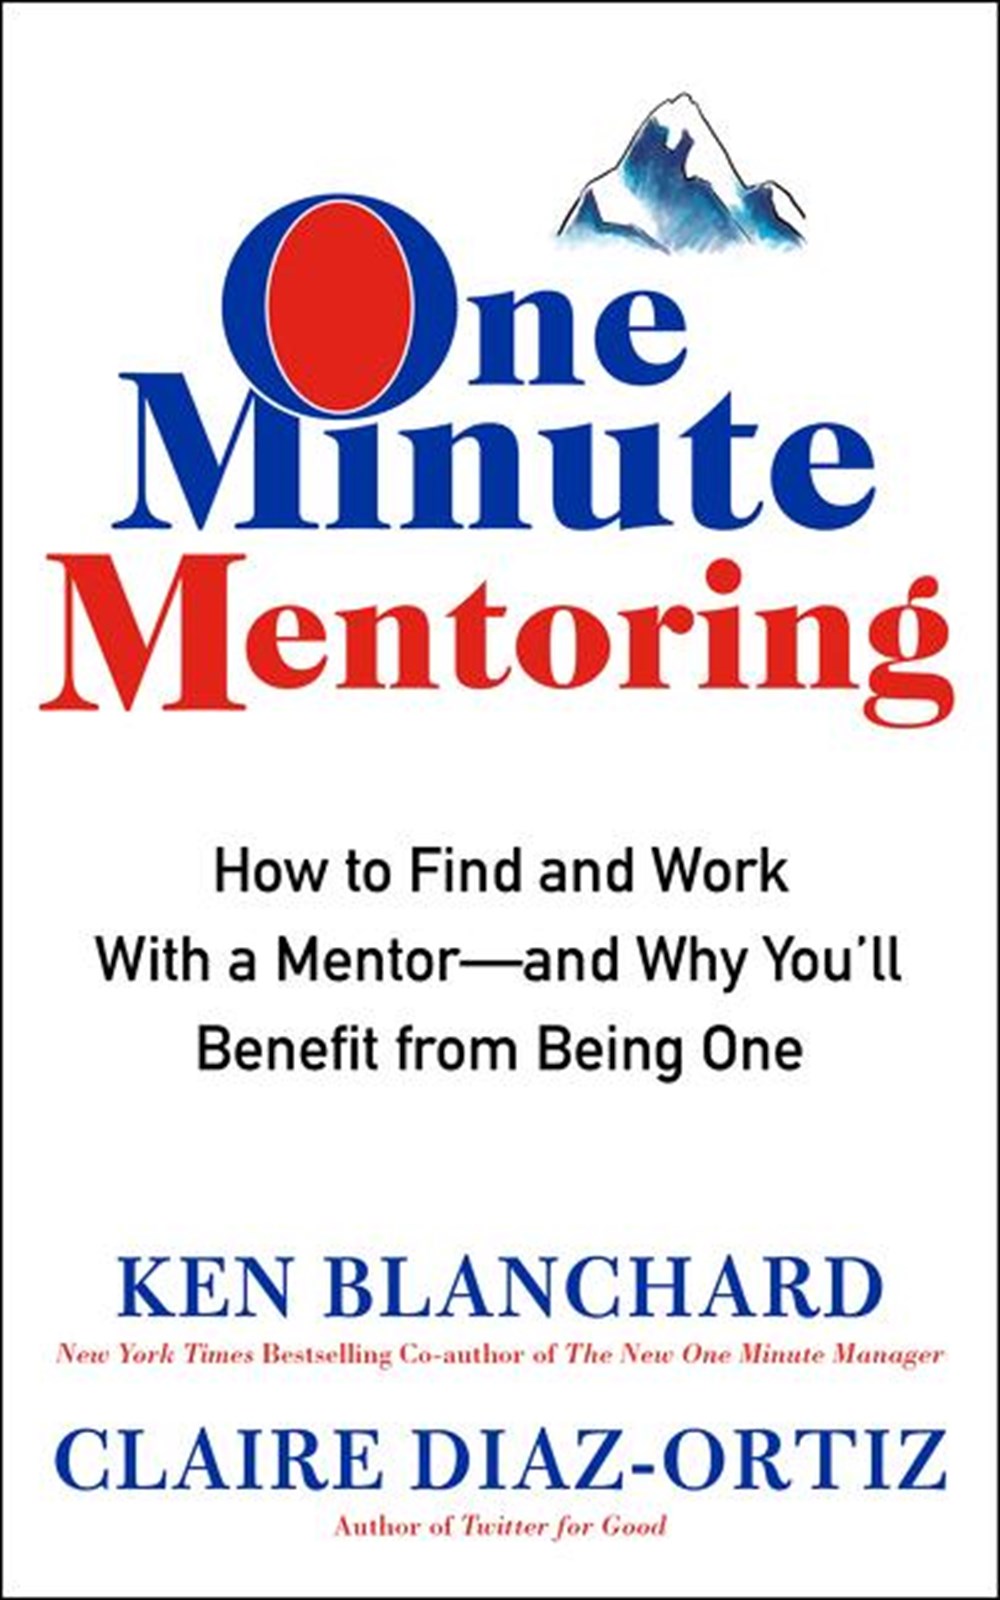 One Minute Mentoring How to Find and Work with a Mentor--And Why You'll Benefit from Being One